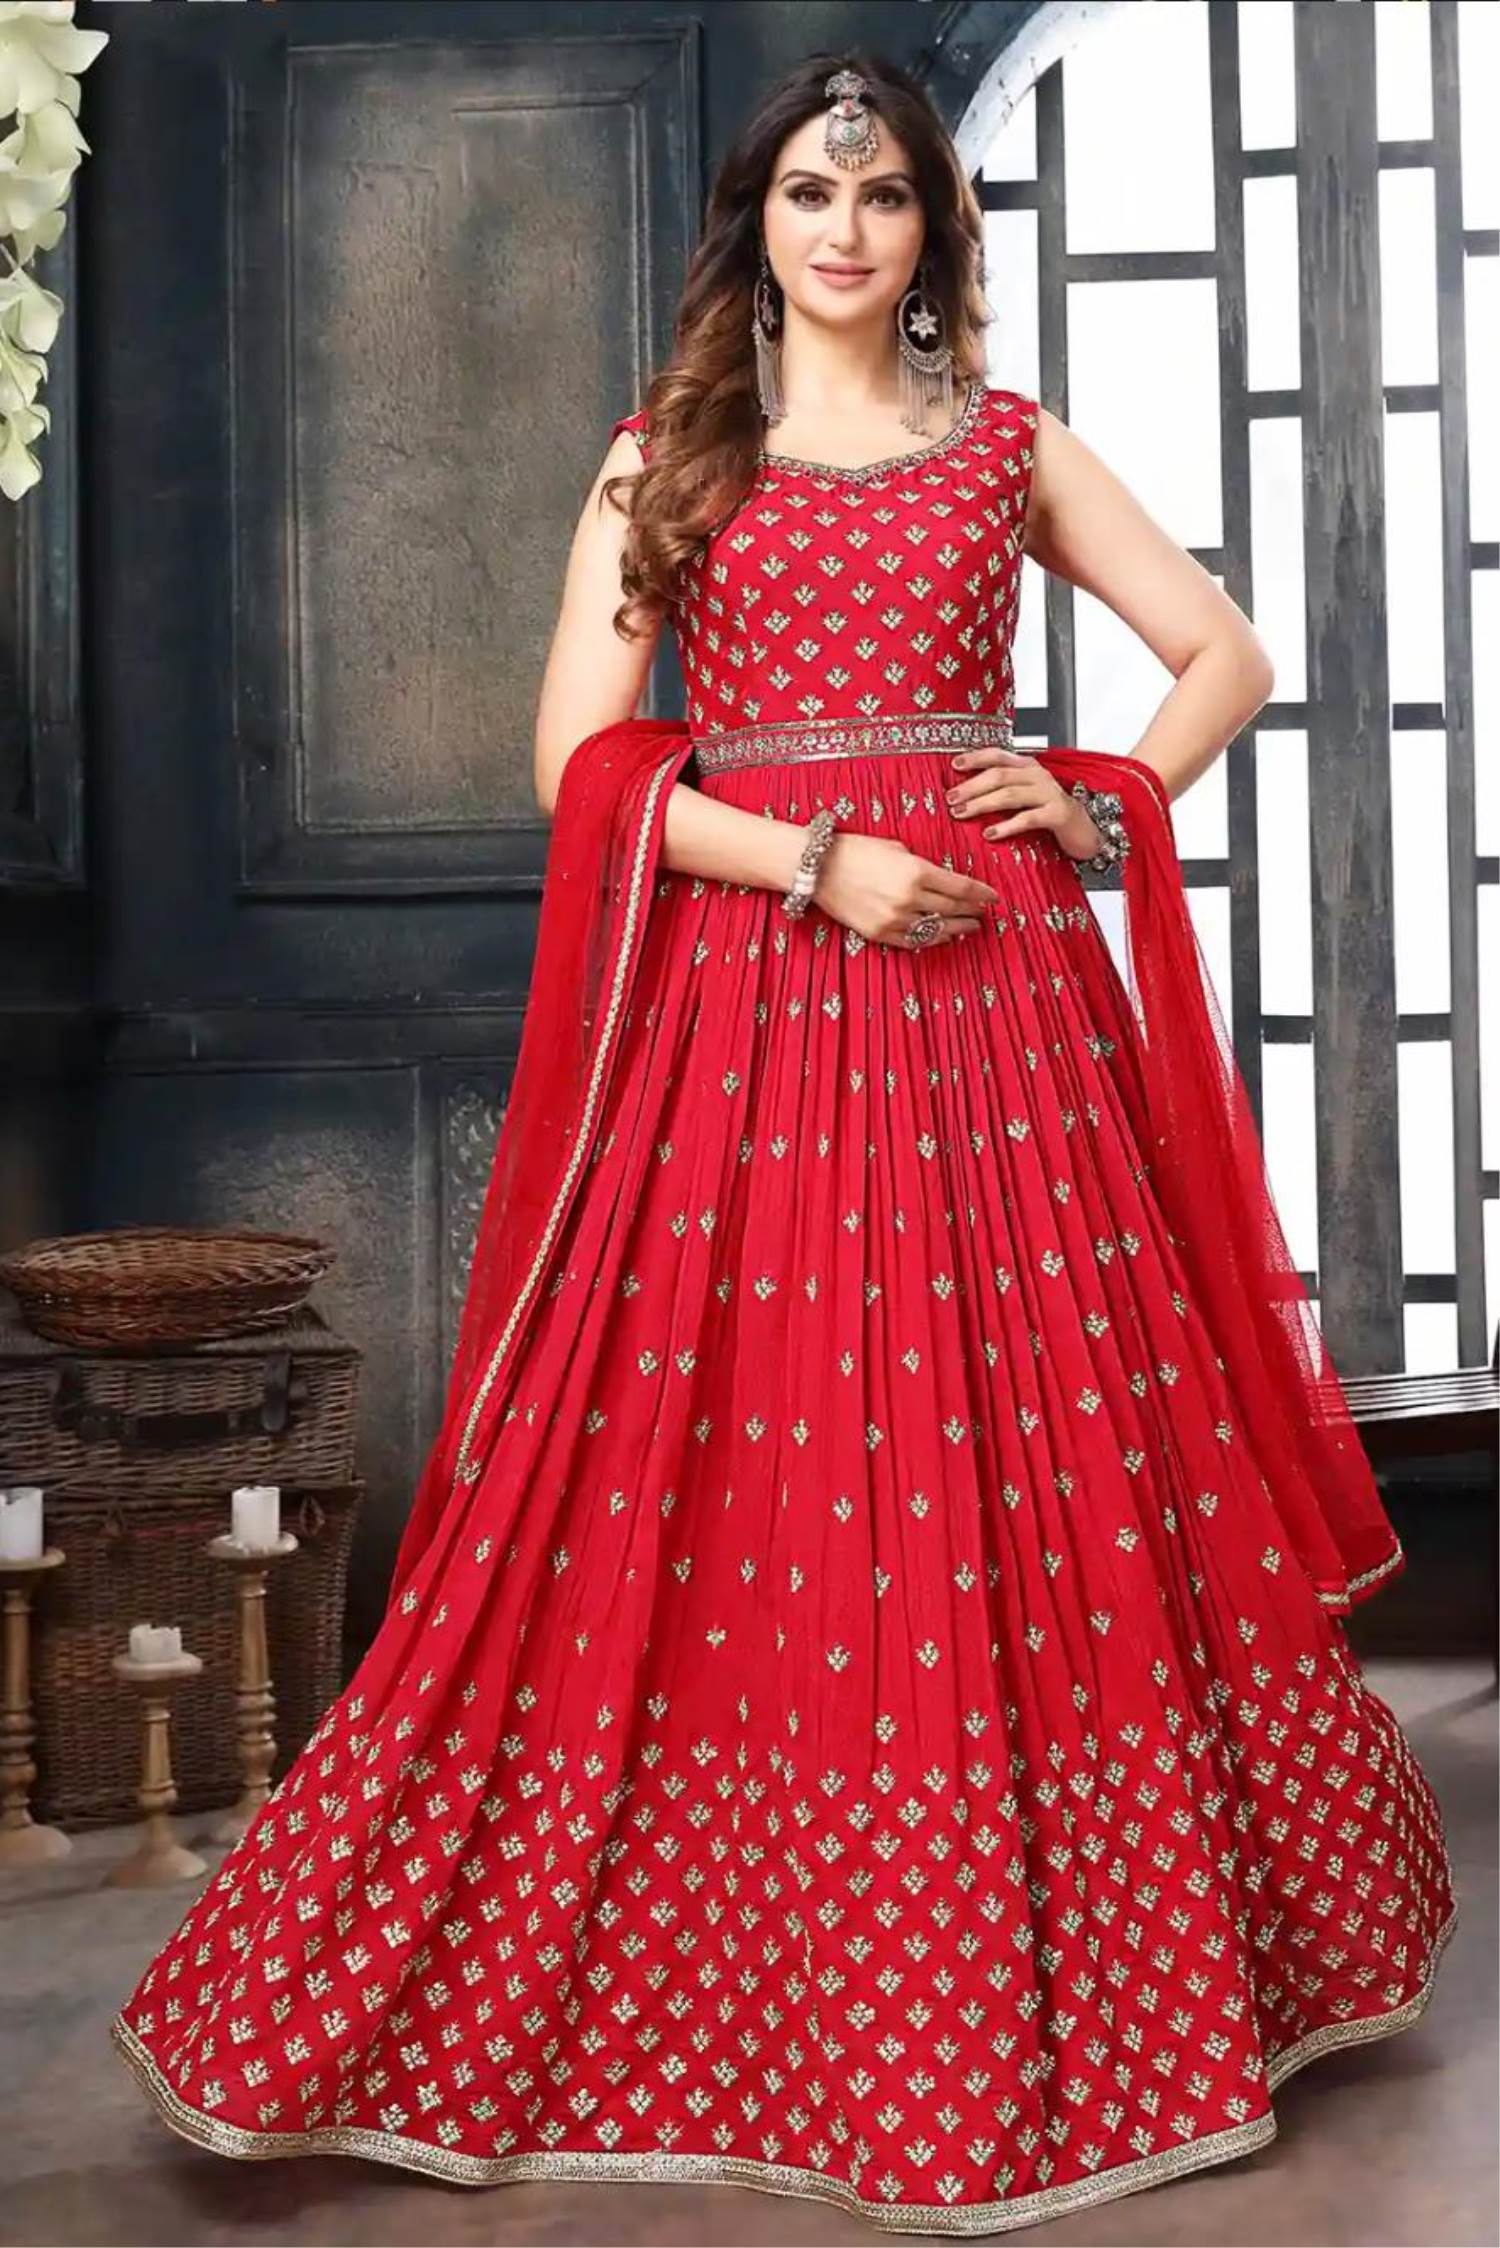 Search results for: 'Rani color georgette fabric adorning vartika sing  anarkali sui'